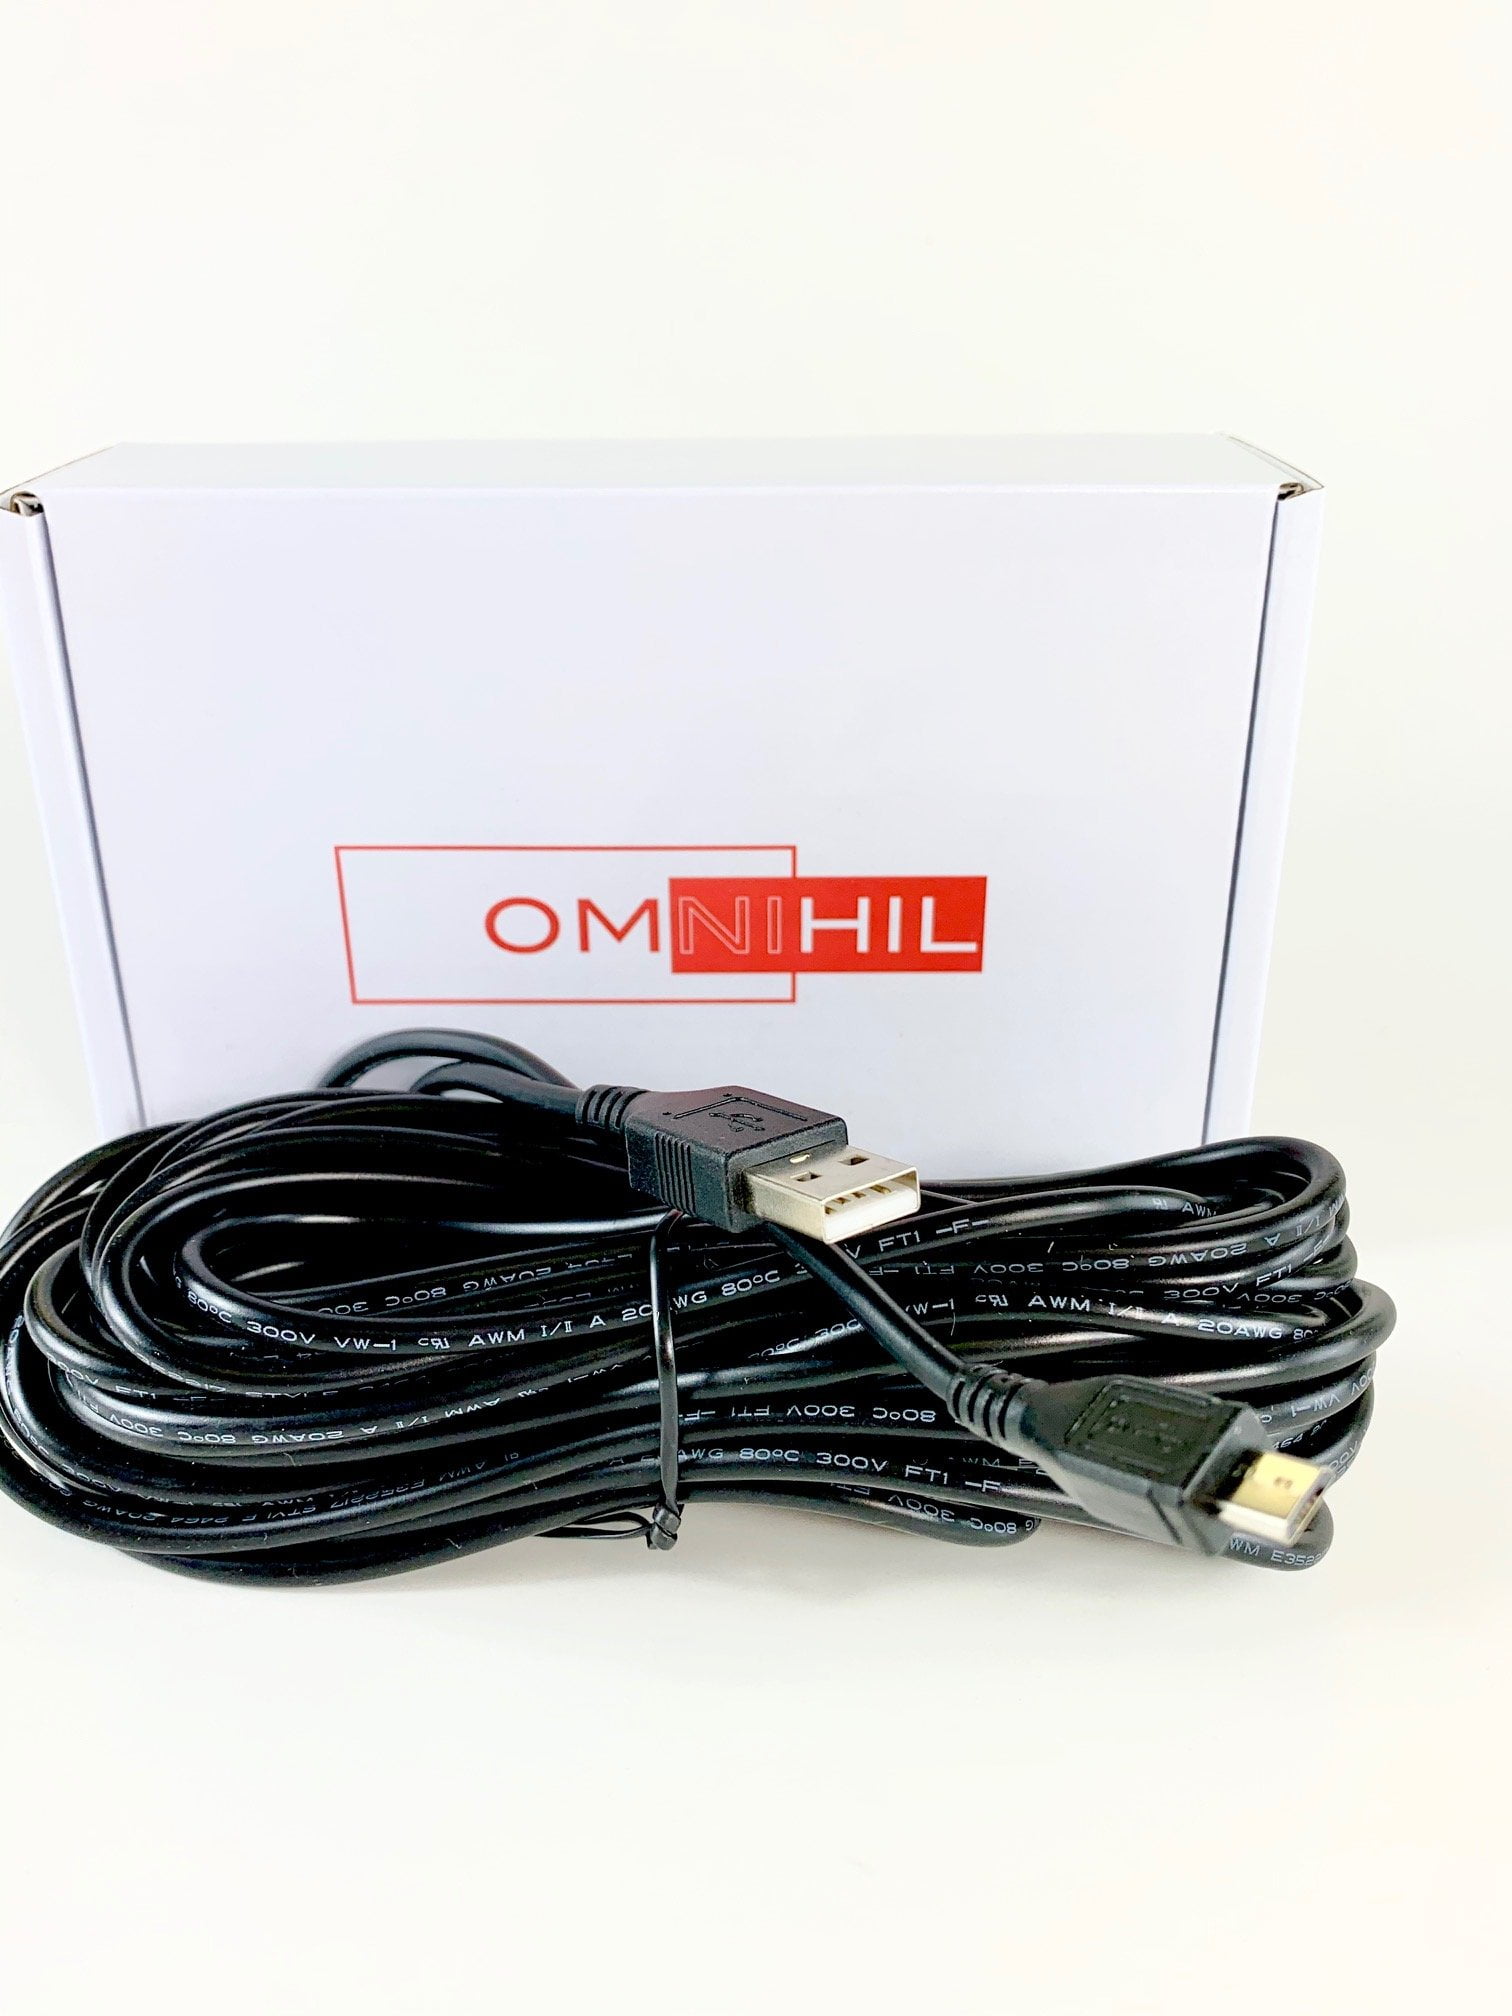 OMNIHIL 8 Feet Long High Speed USB 2.0 Cable Compatible with HITACHI CP-X25LWN